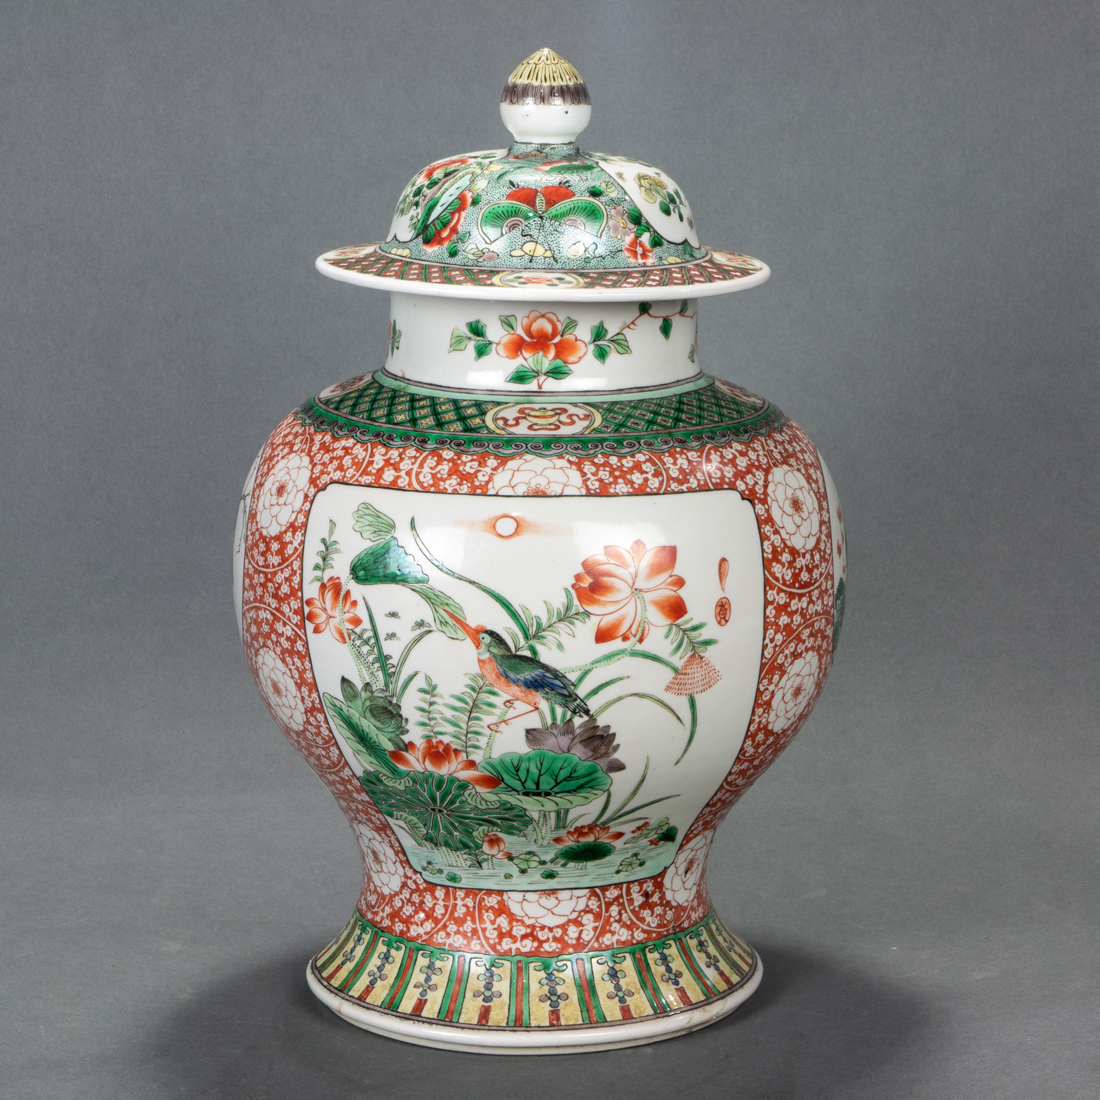 CHINESE FAMILLE VERTE COVERED JAR 3a10b6